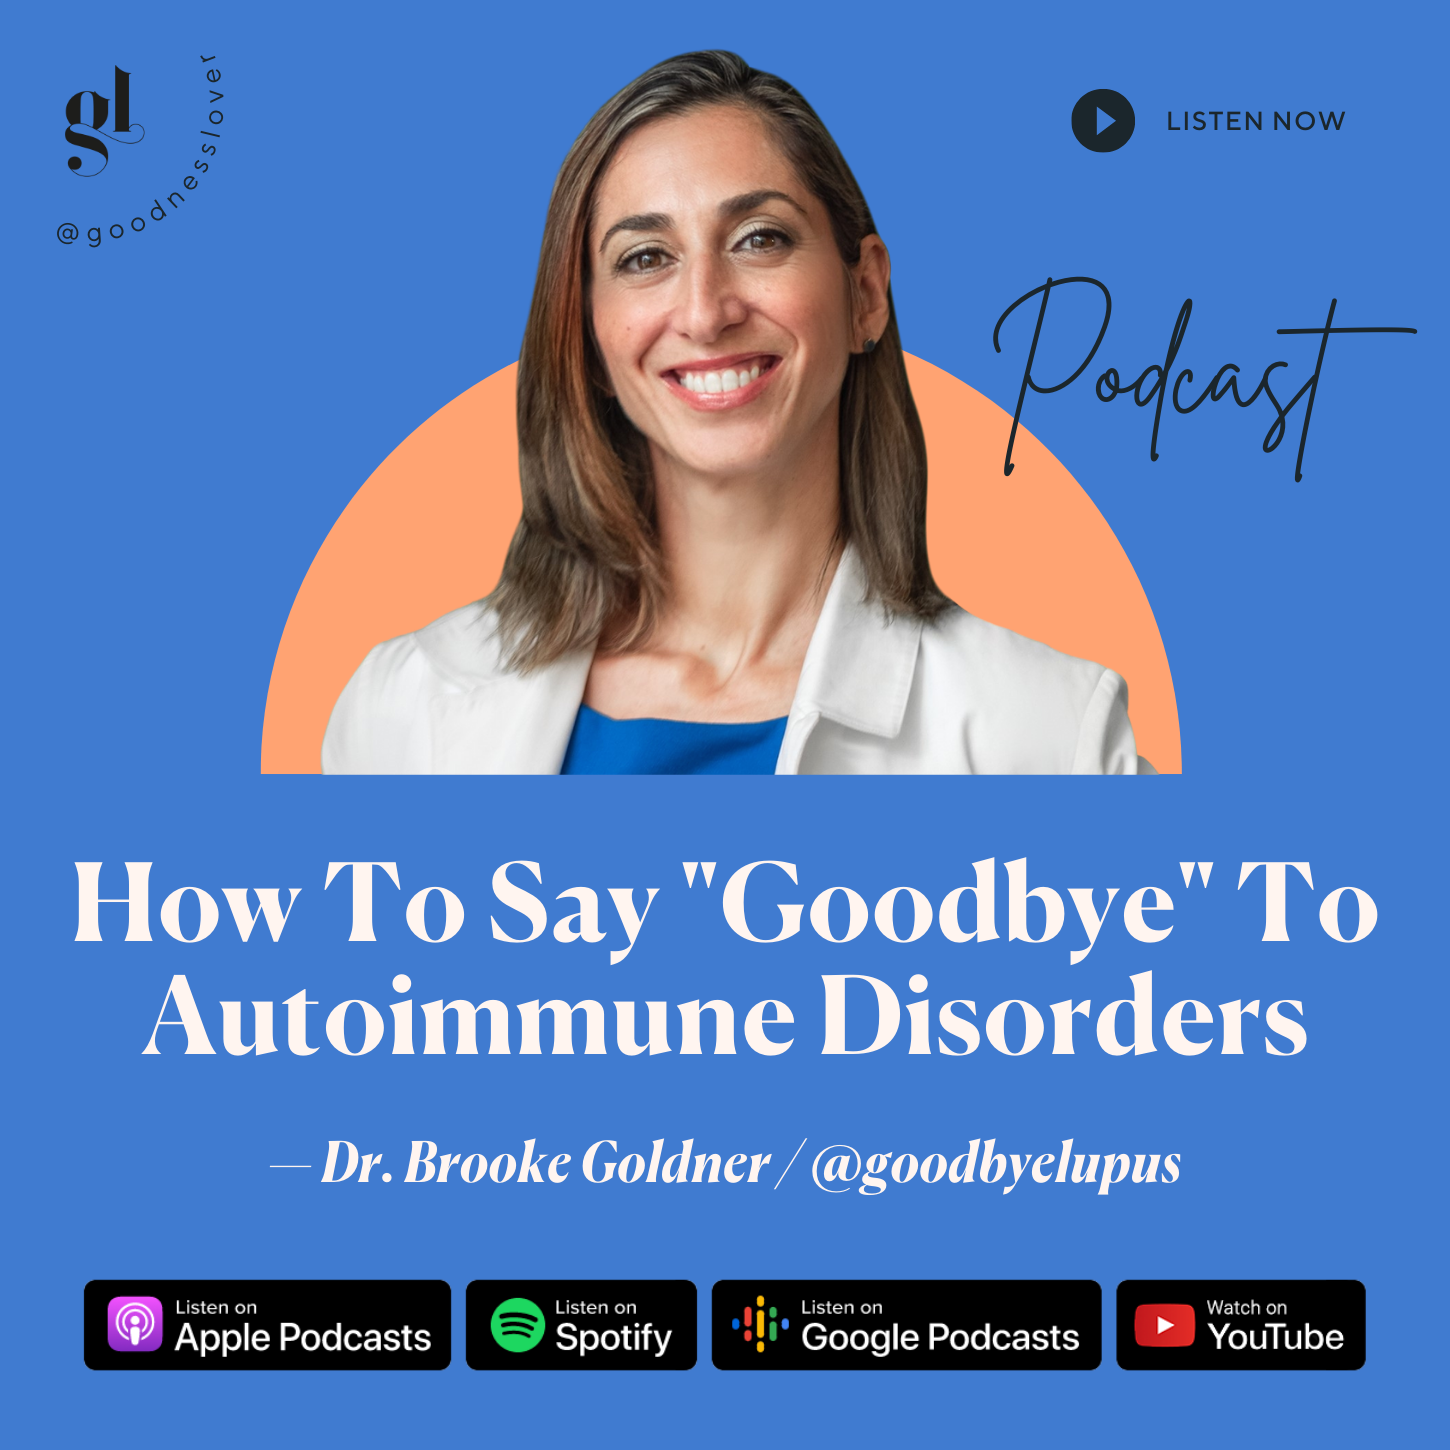 The Power of Nutrition on Autoimmune Disorders | Dr. Brooke Goldner